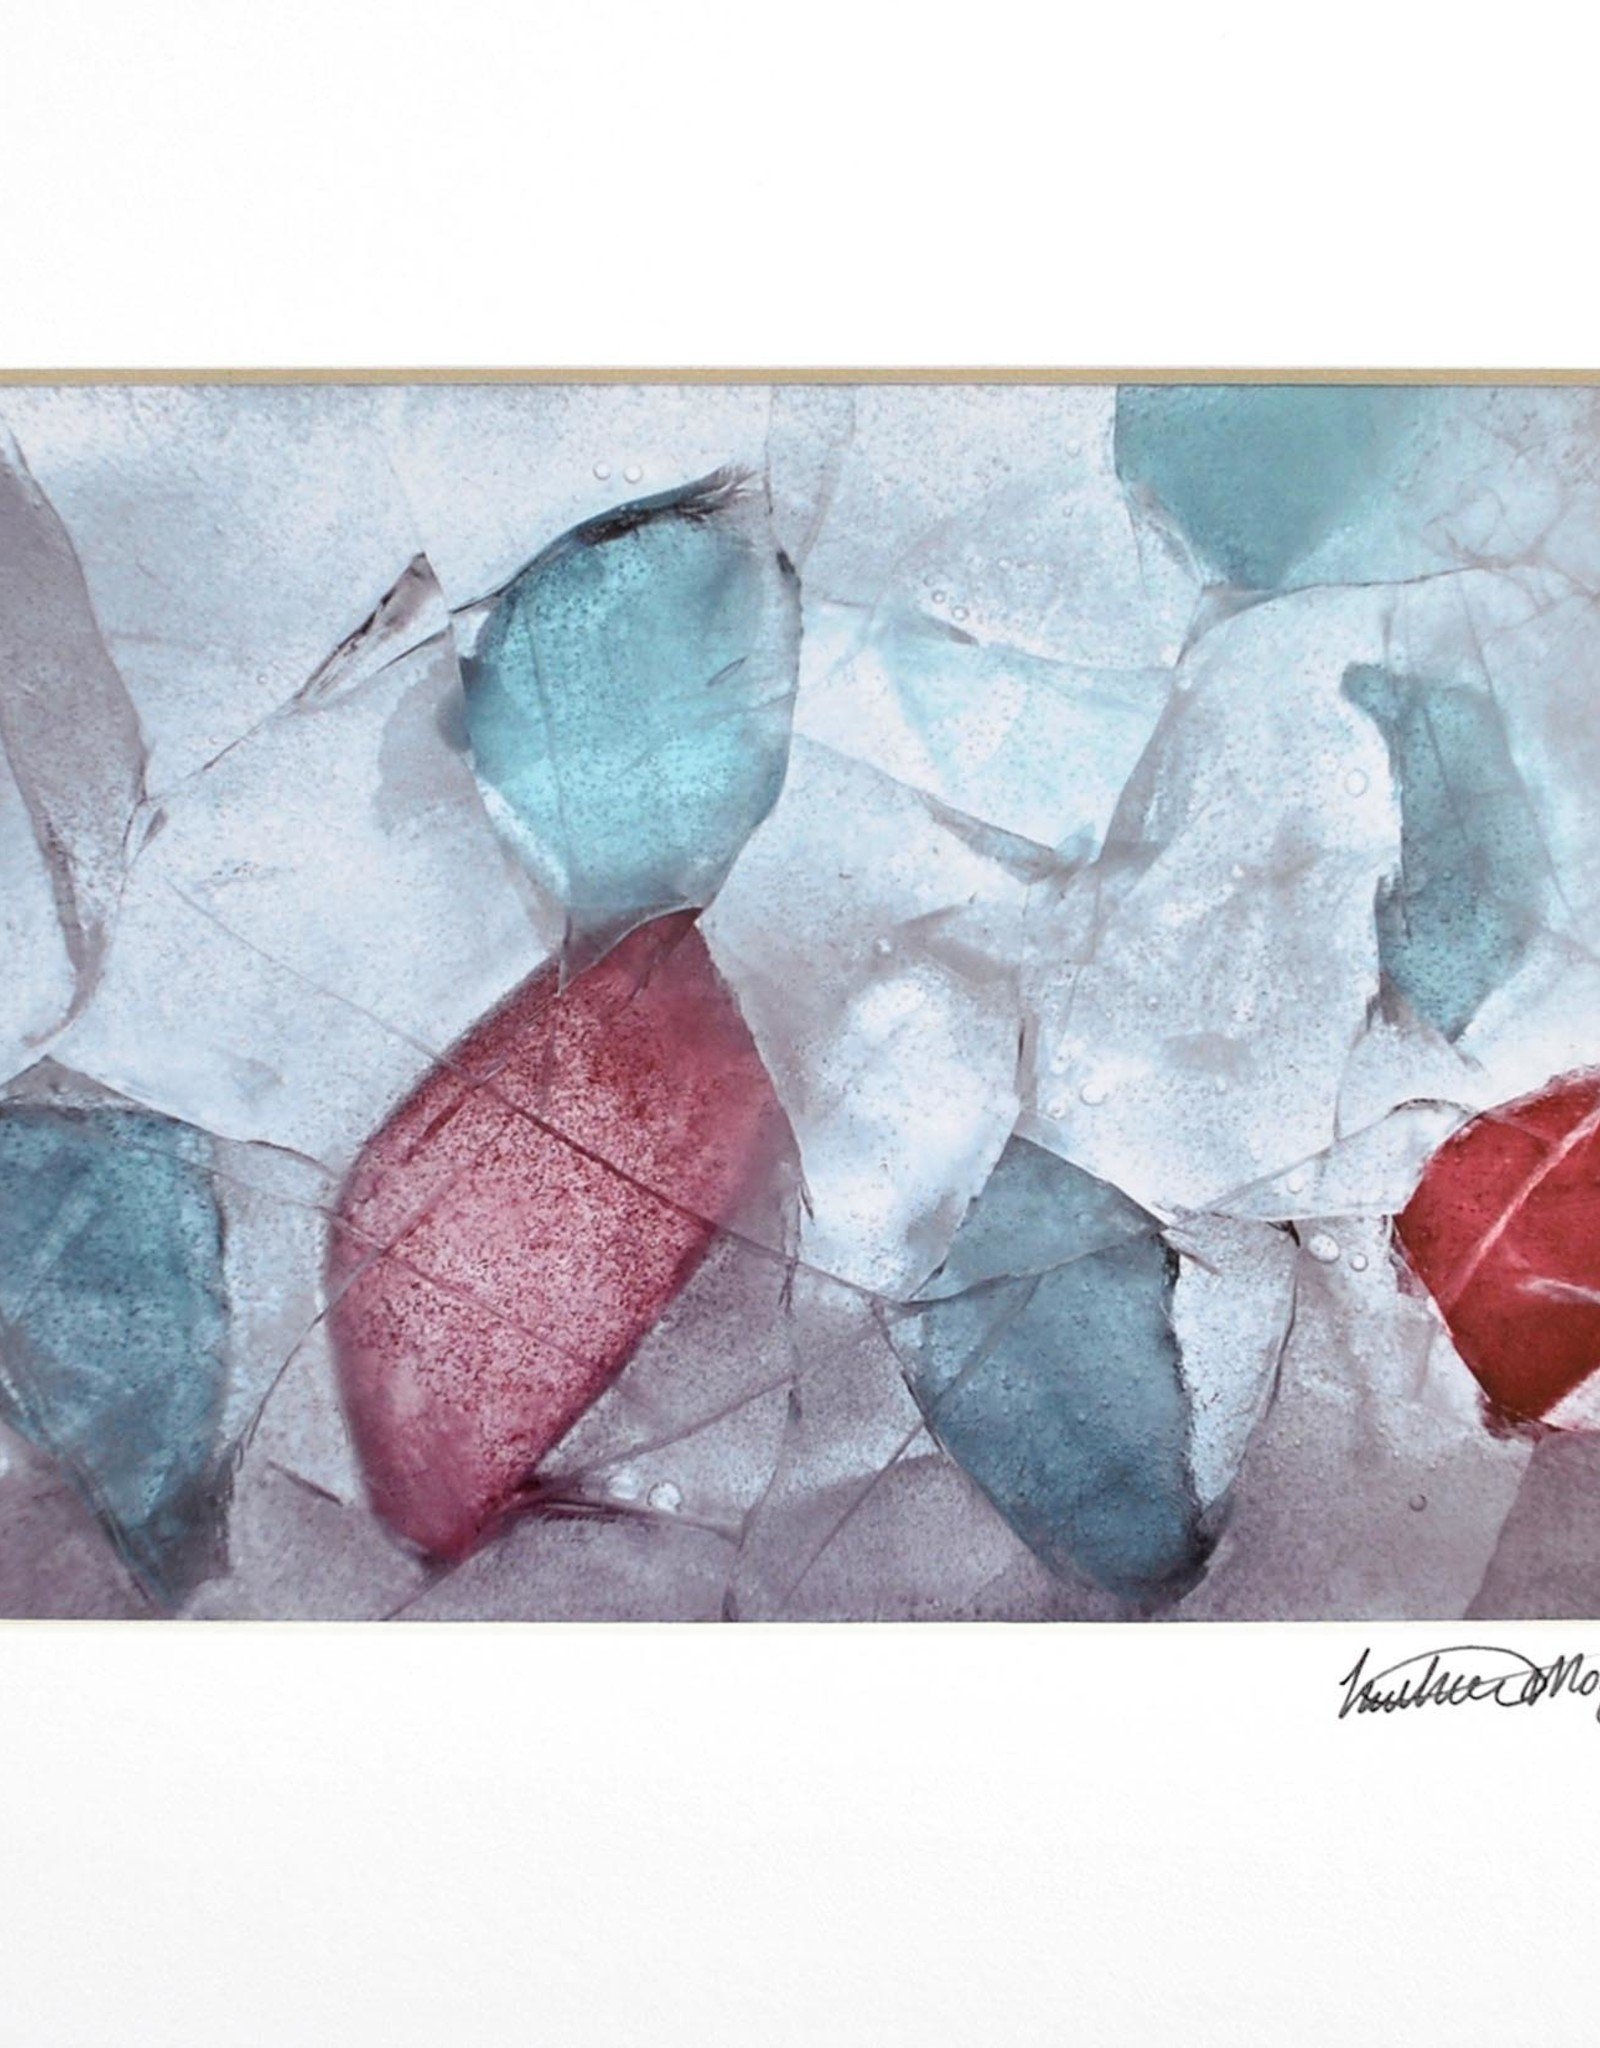 “Sea Glass from Maine” by Heather Monks (5x7 print, 8x10 mat)